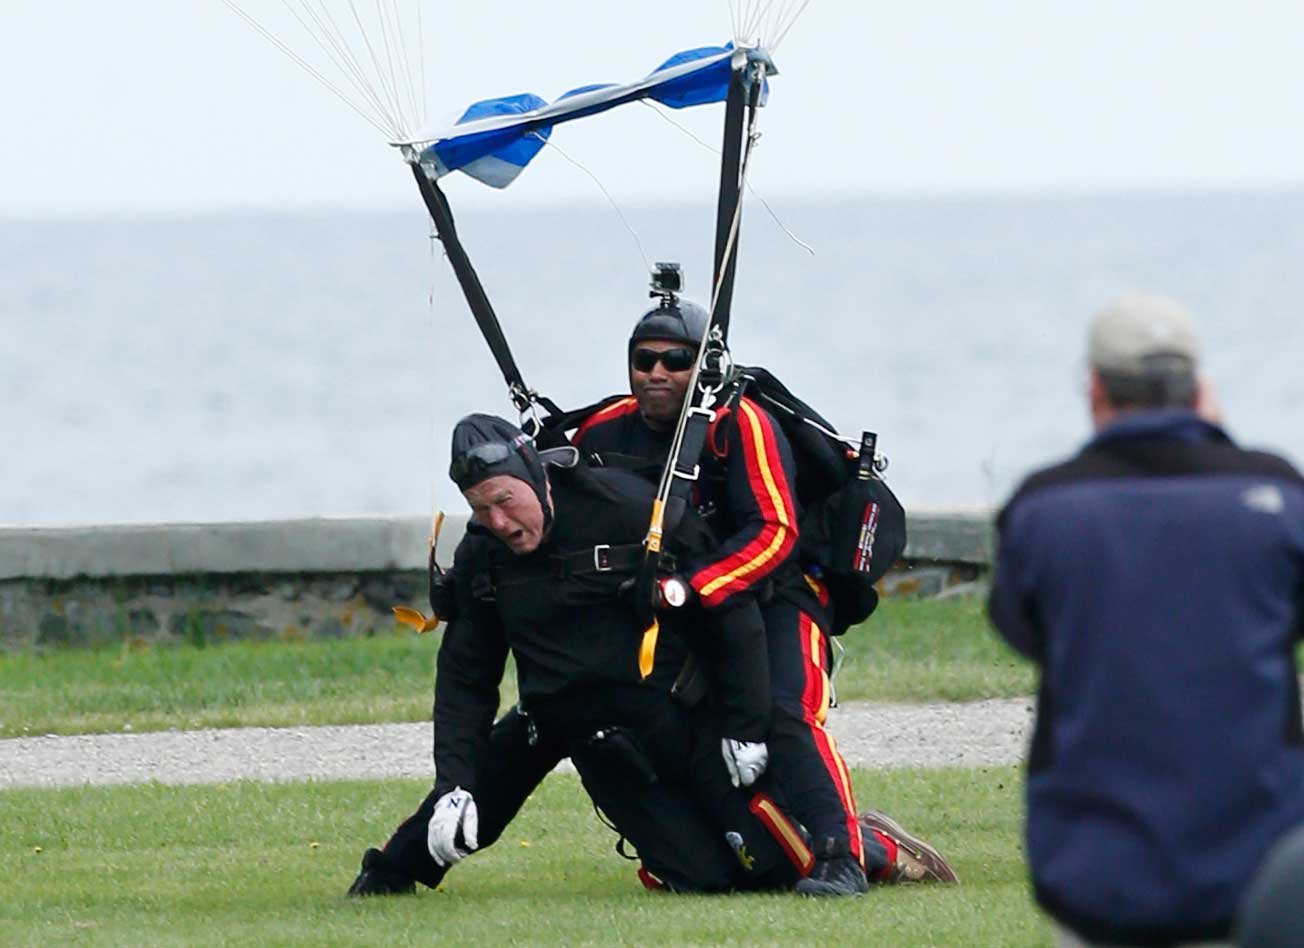 Former President George H.W. Bush, left, strapped to Sgt. Mike Elliott, a retired member of the Army's Golden Knights parachute team, lands on the lawn at St. Anne's Episcopal Church after making a tandem parachute jump near his summer home in Kennebunkport, Maine, in celebration of his 90th birthday, June 12, 2014.